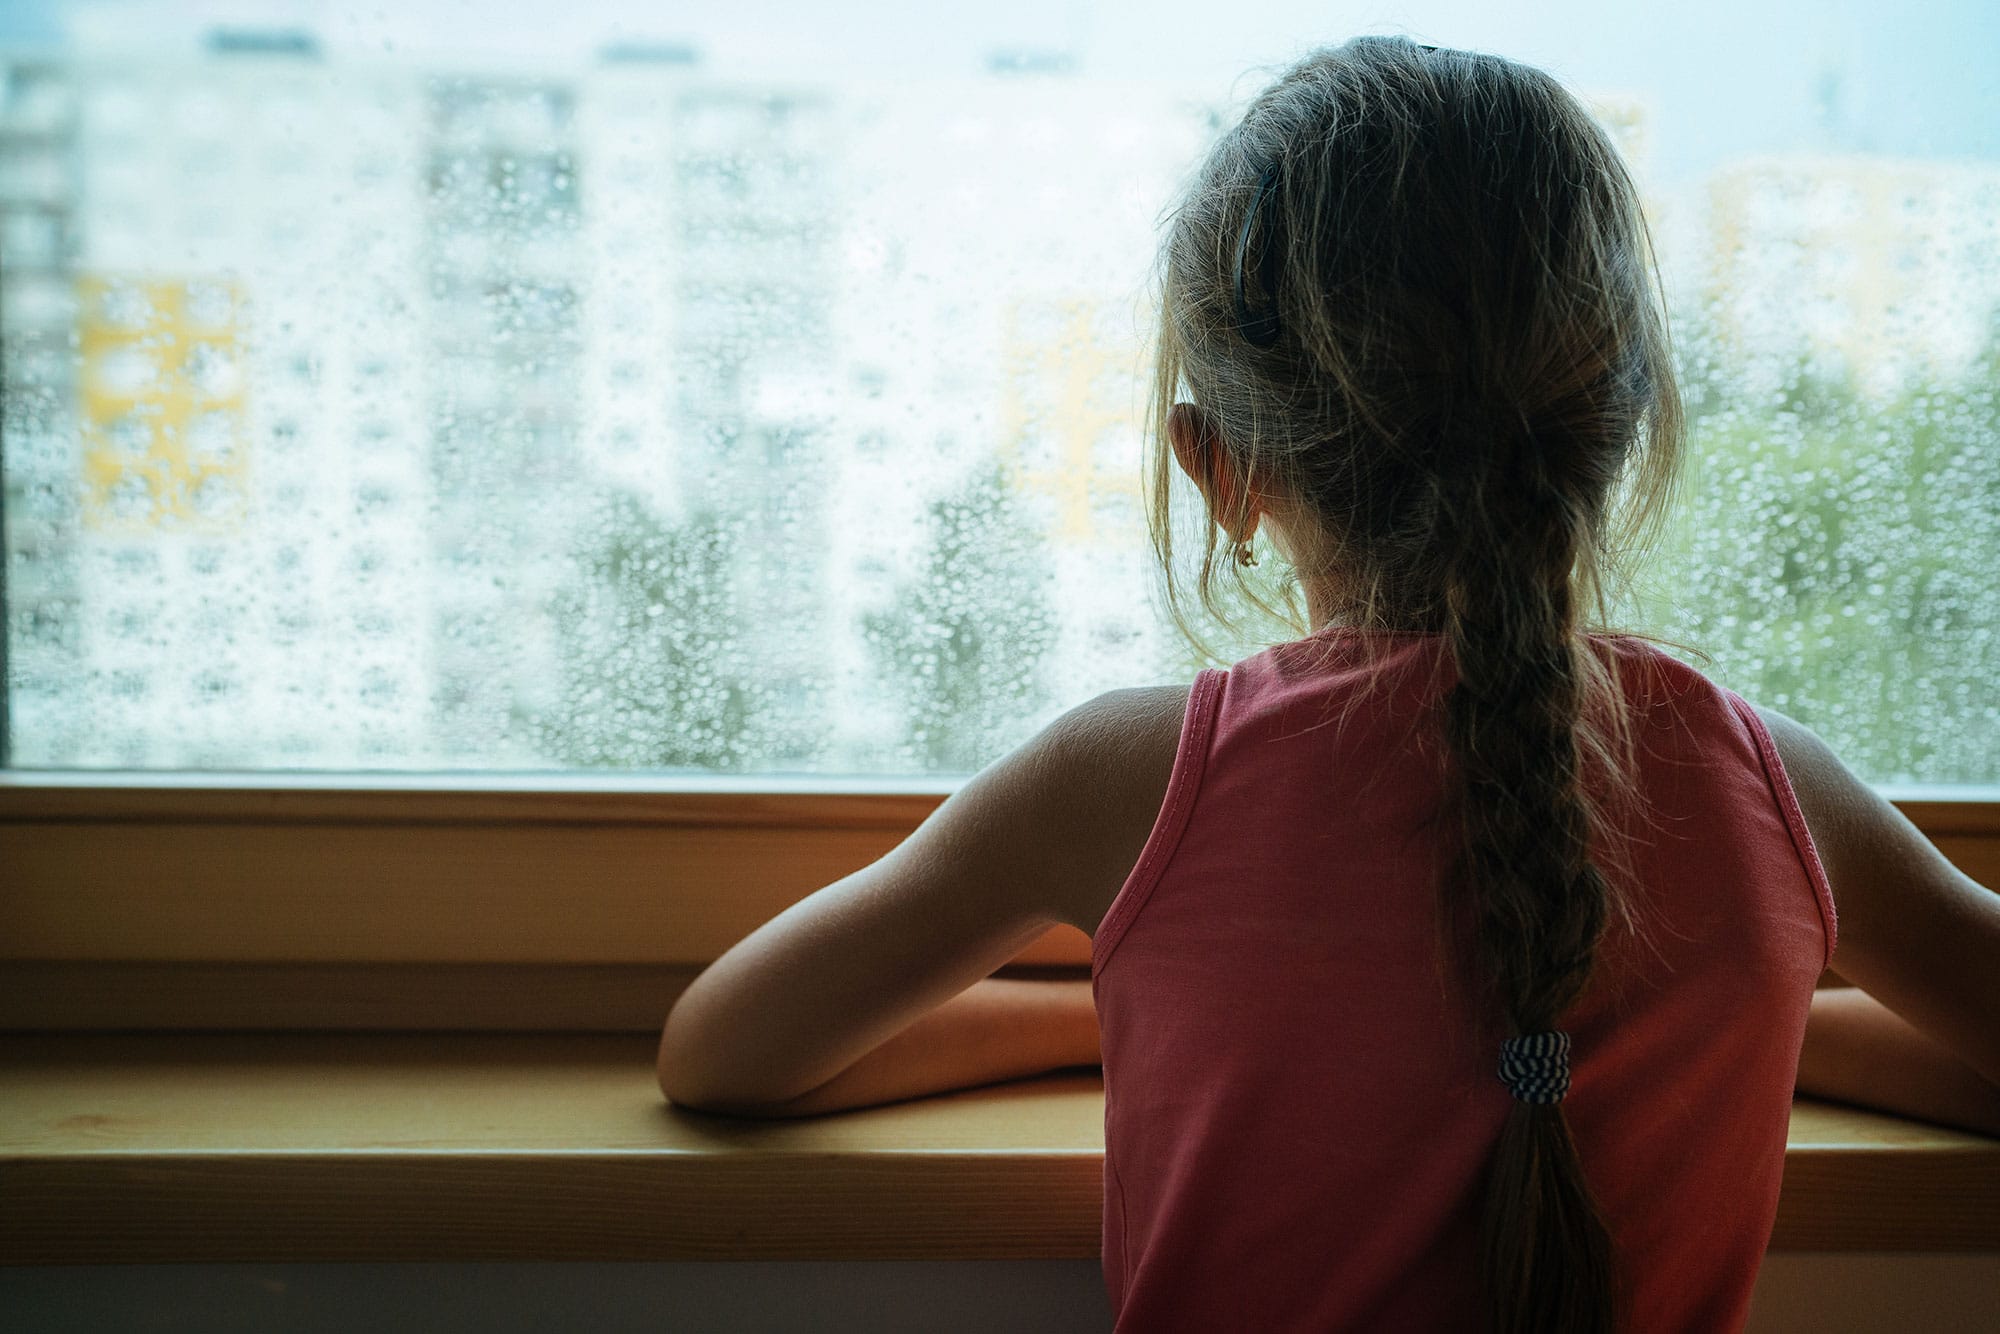 Our children’s health is in crisis and we need a proper plan to get them moving again